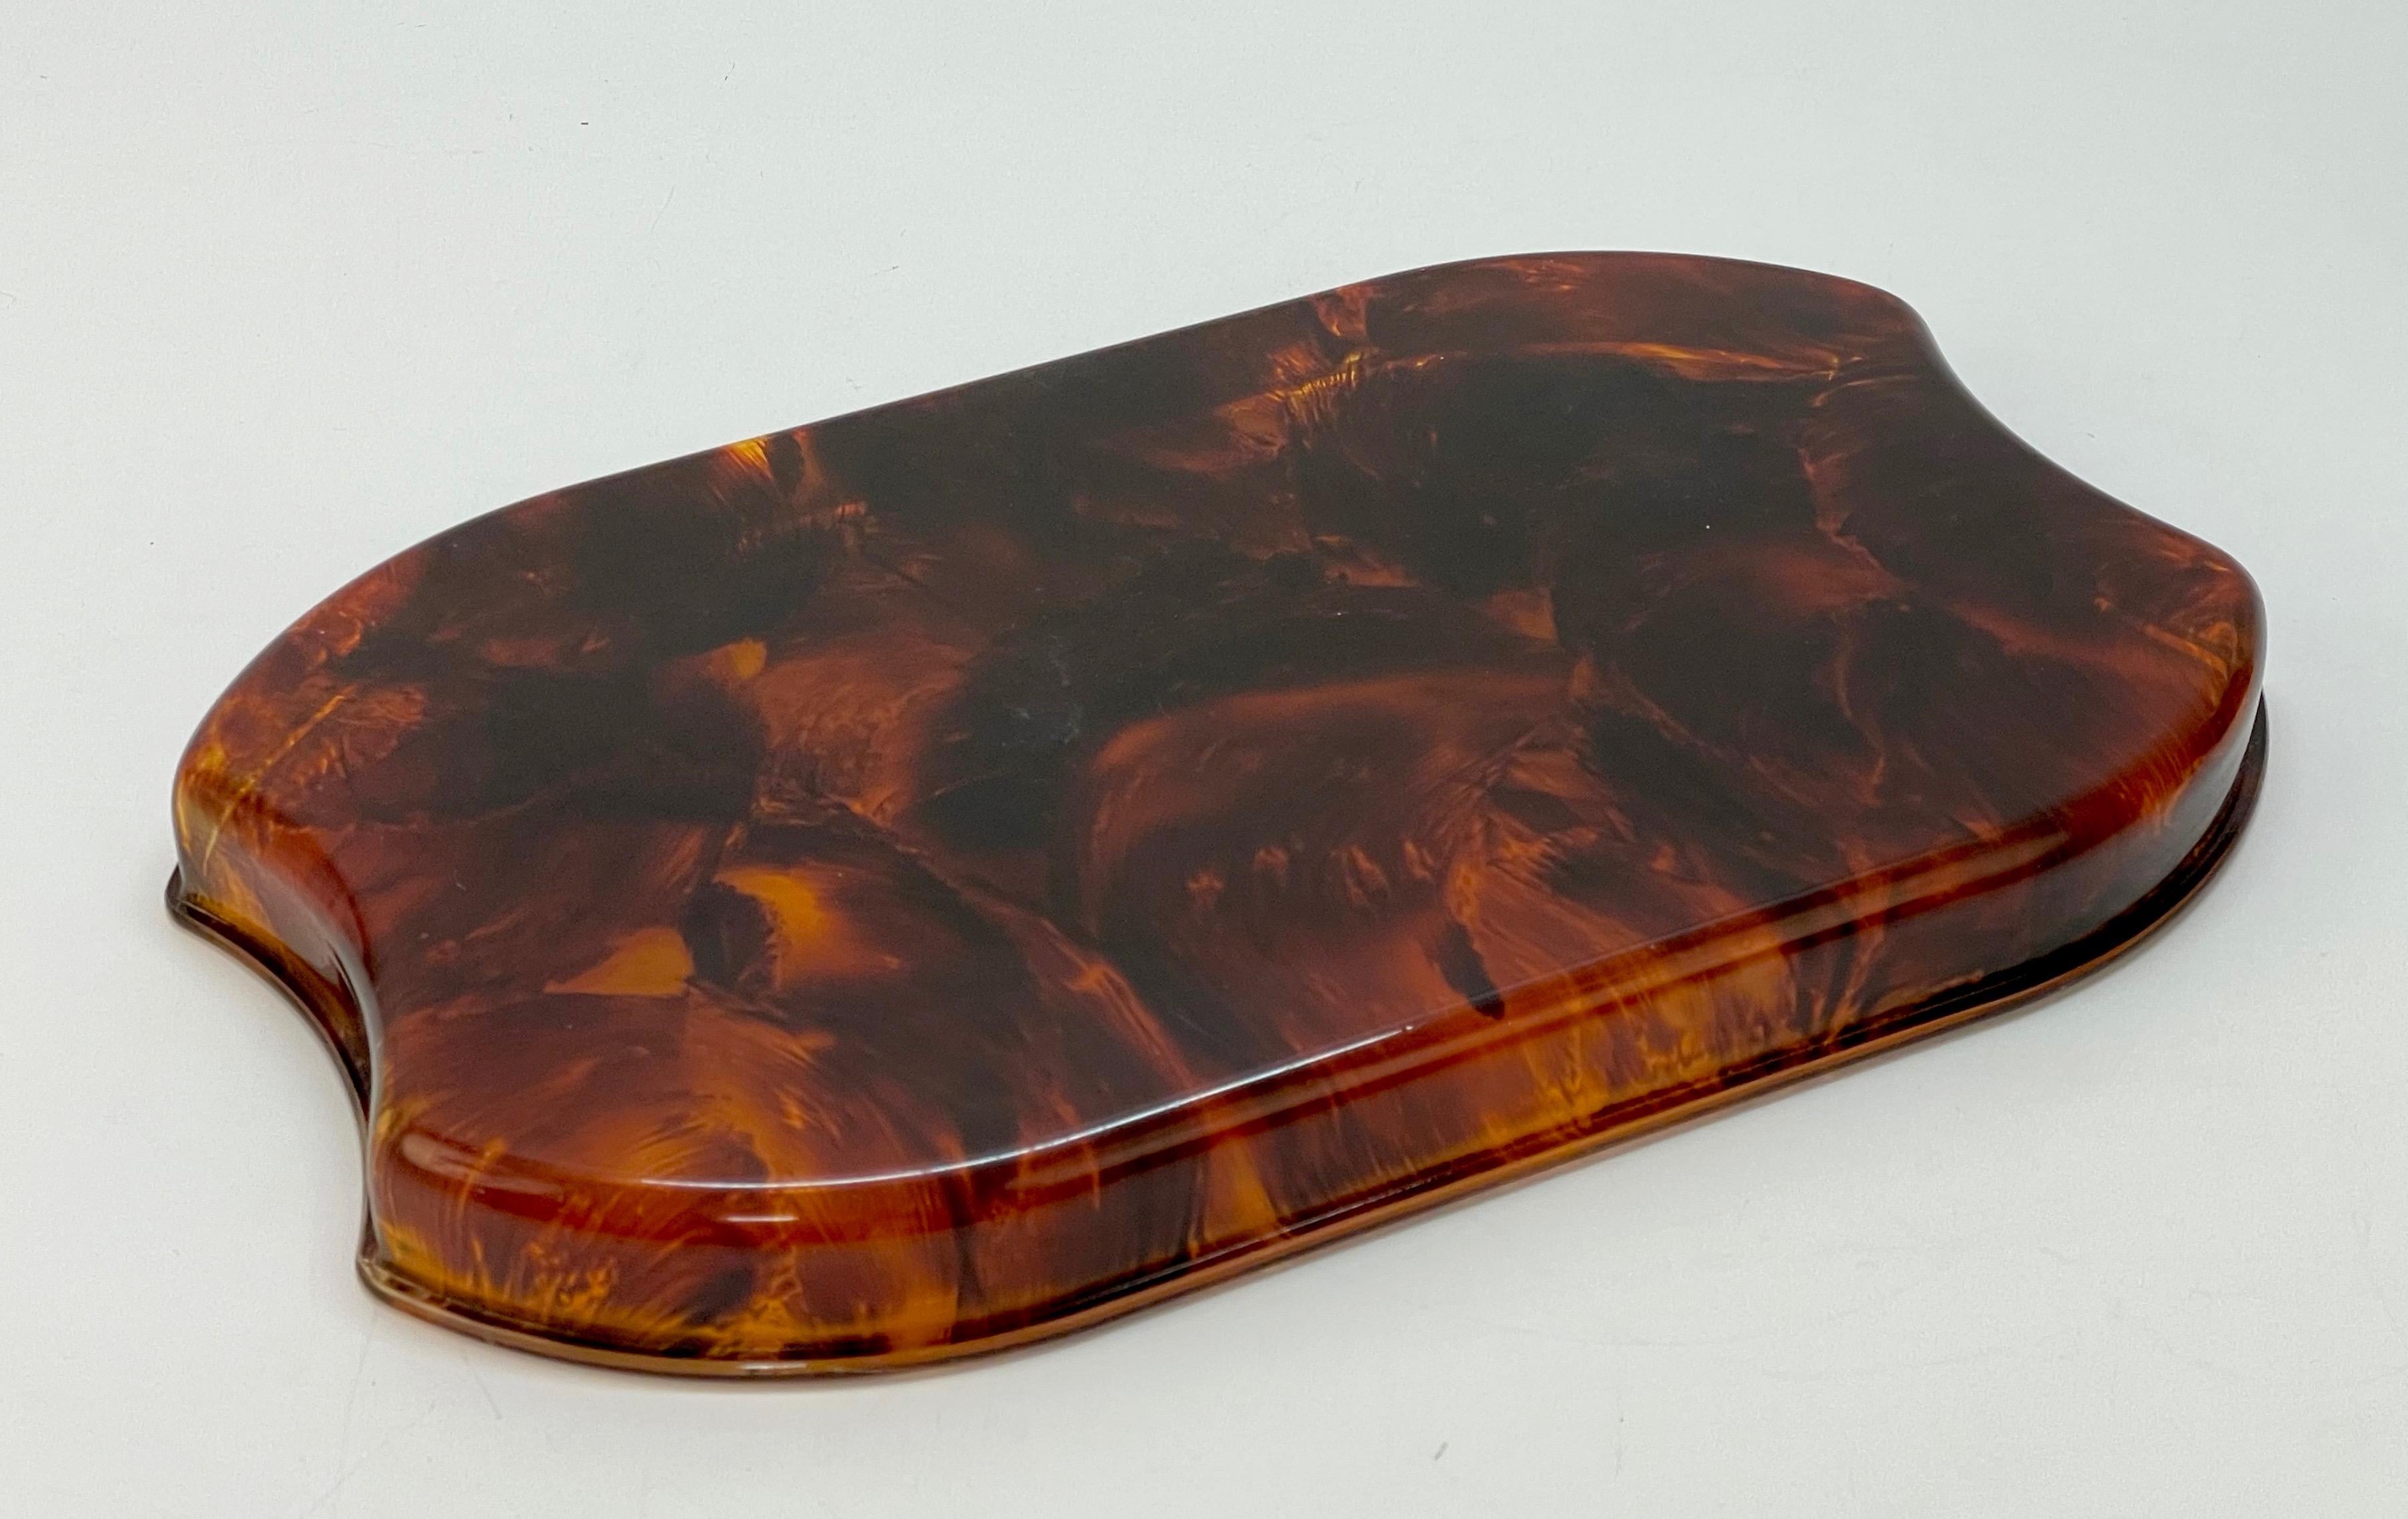 Acrylic Midcentury Modern Italian Lucite Tortoiseshell Effect Oval Serving Tray, 1970s For Sale